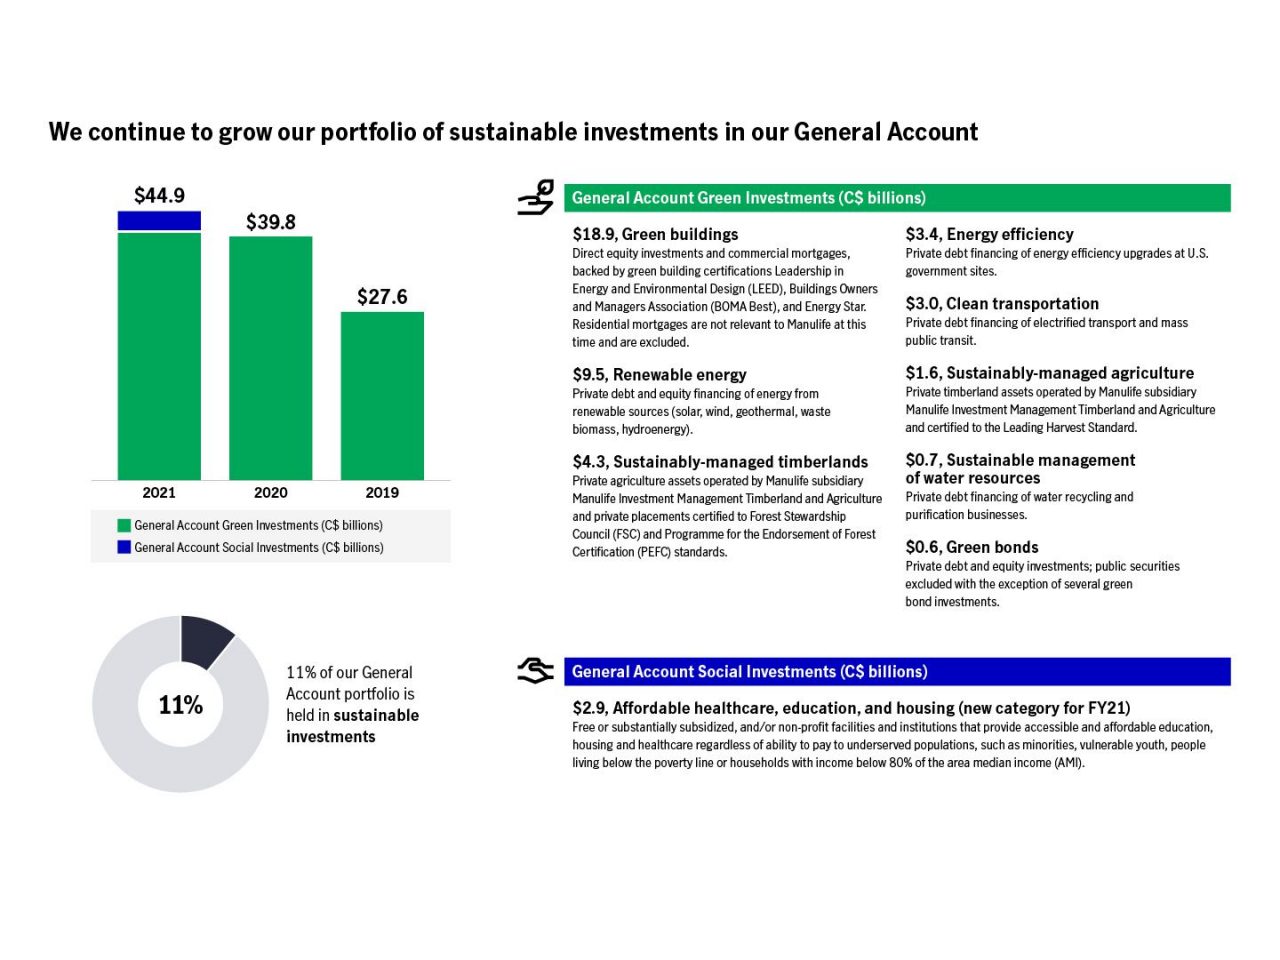 Sustainable investments in general accounts